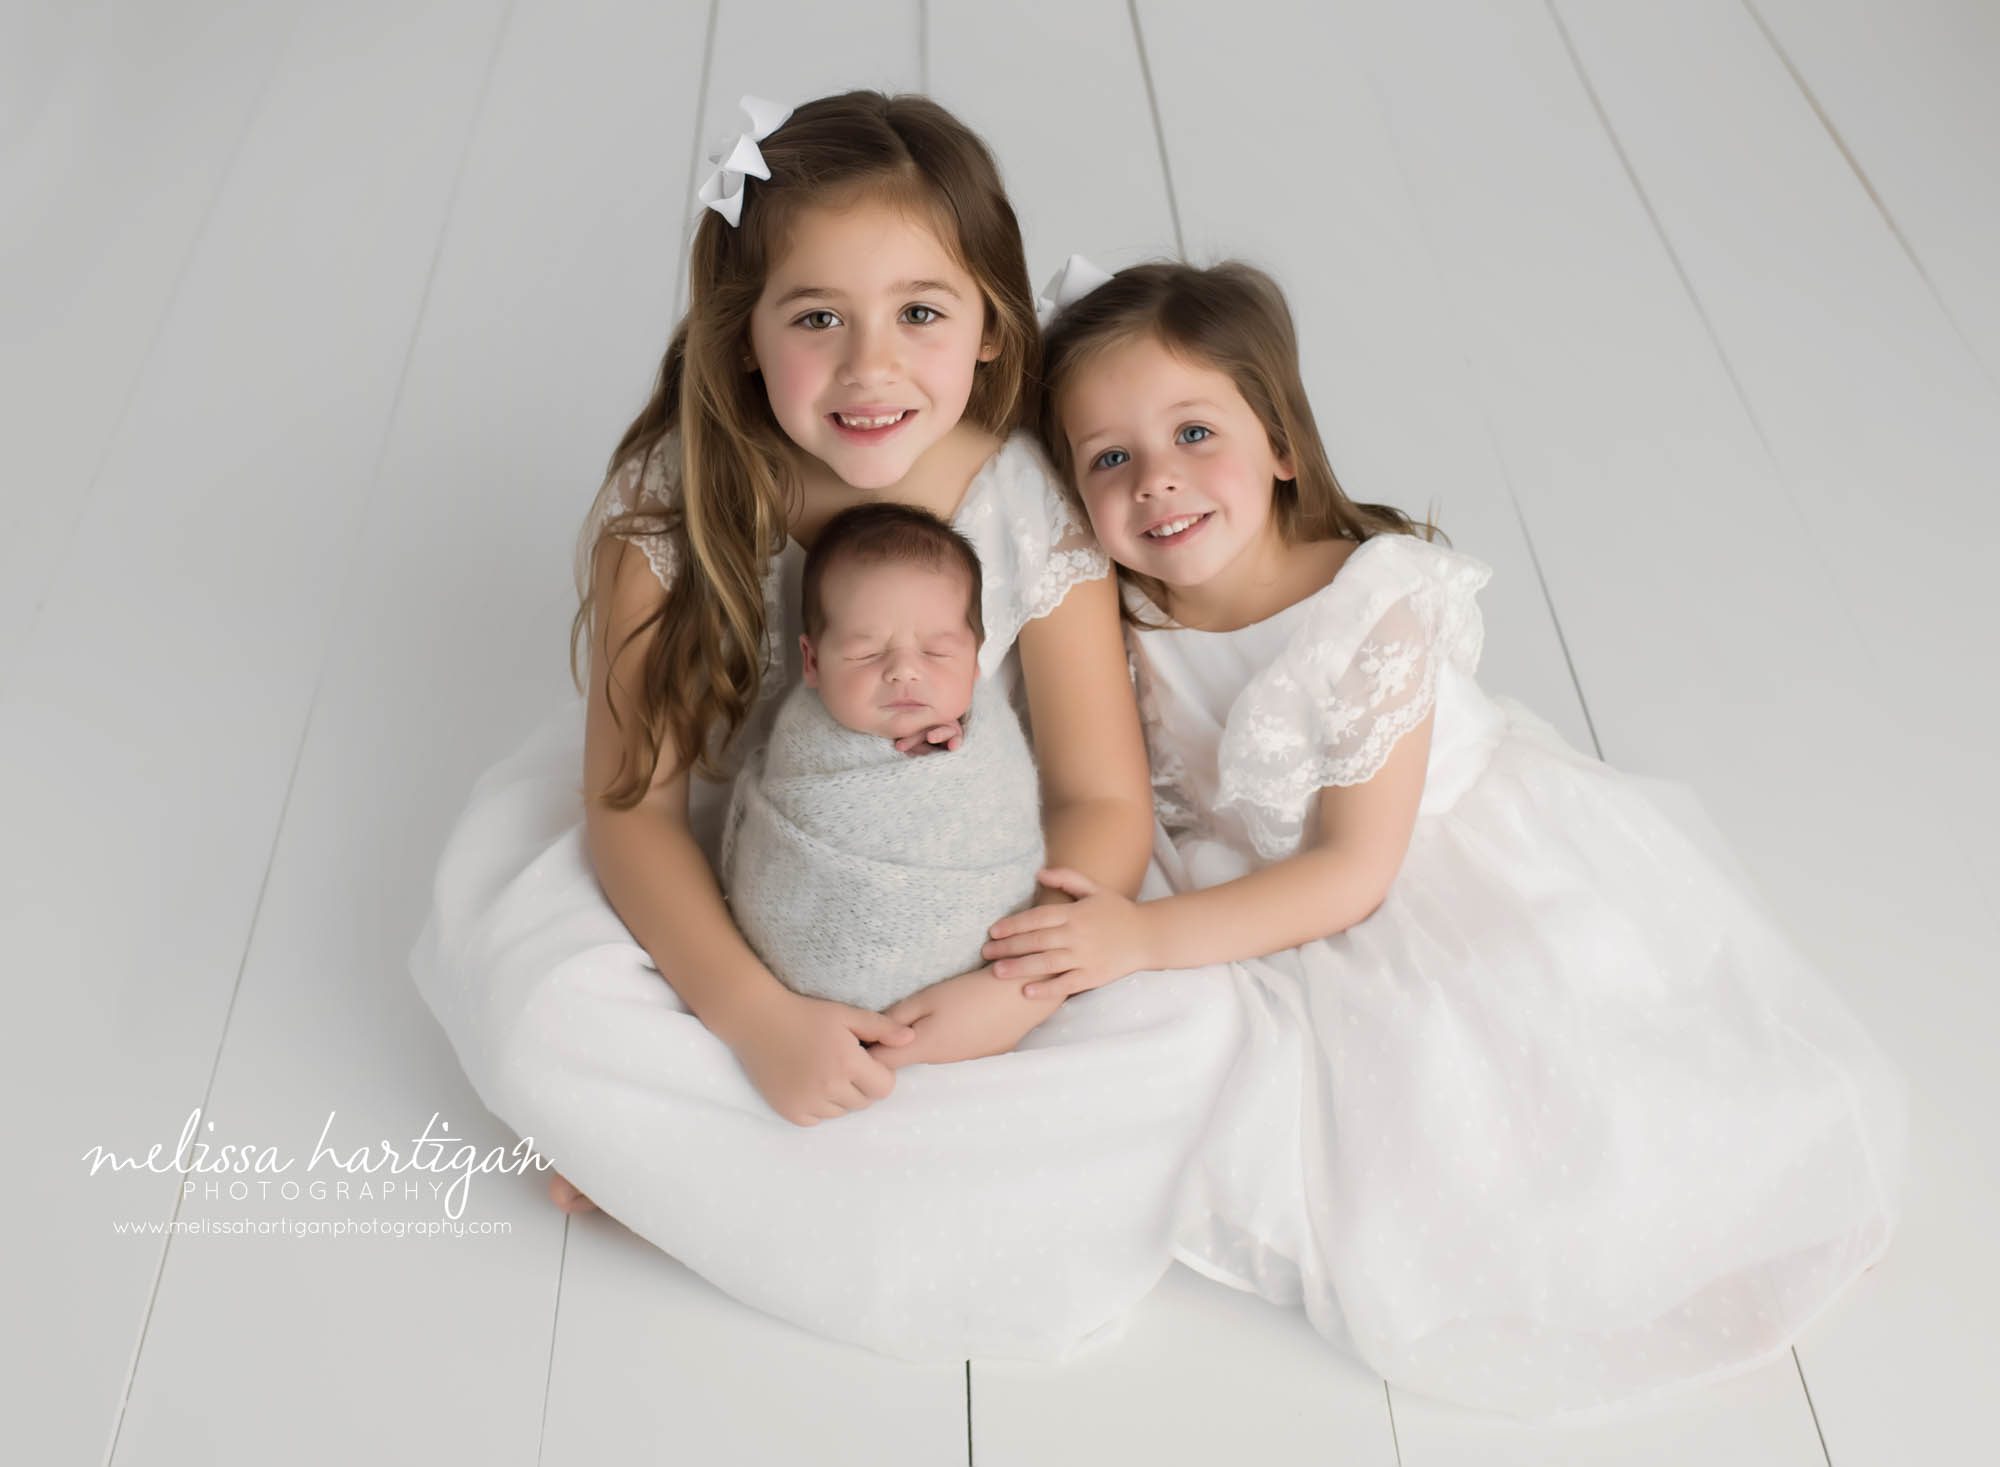 Two big sisters posing with new baby brother wrapped in knitted wrap sibling photo in newborn session captured in Connecticut newborn photography studio